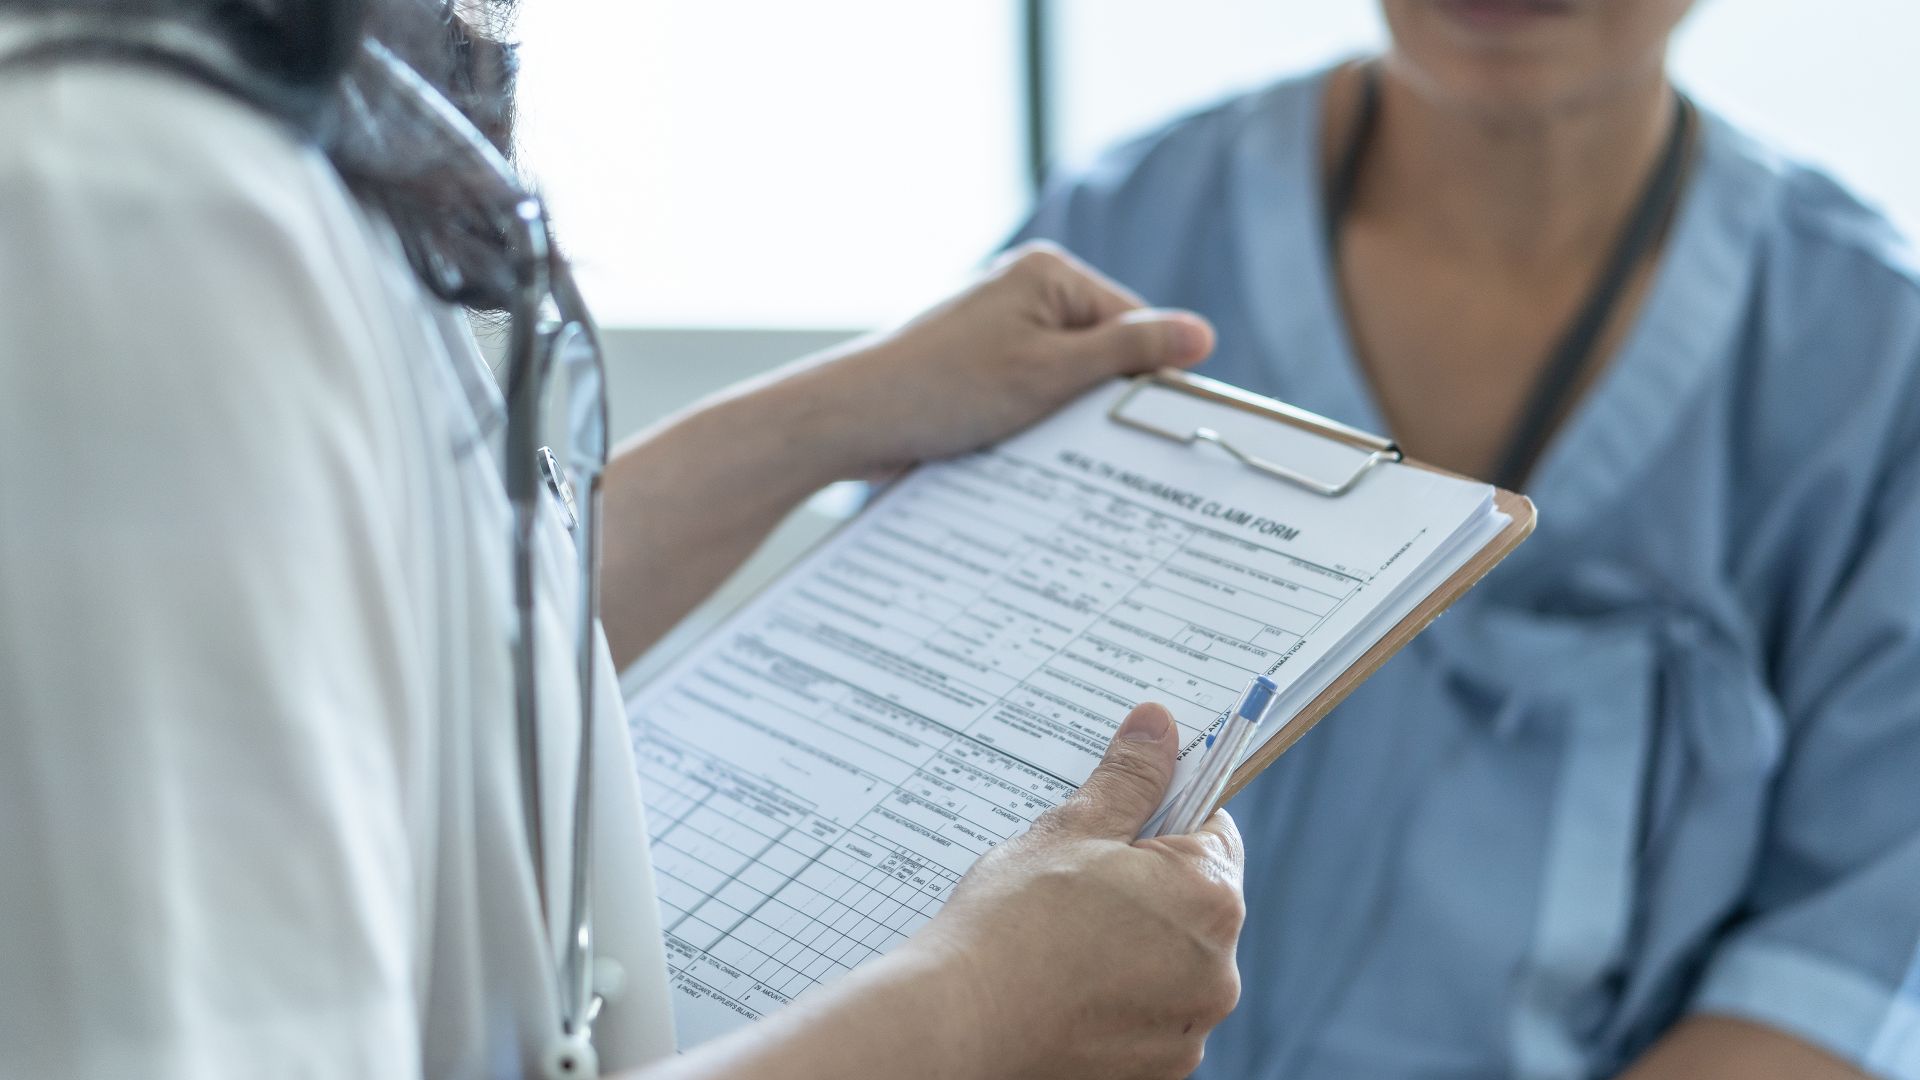 Overcoming the Common Challenges of Processing Medical Claims